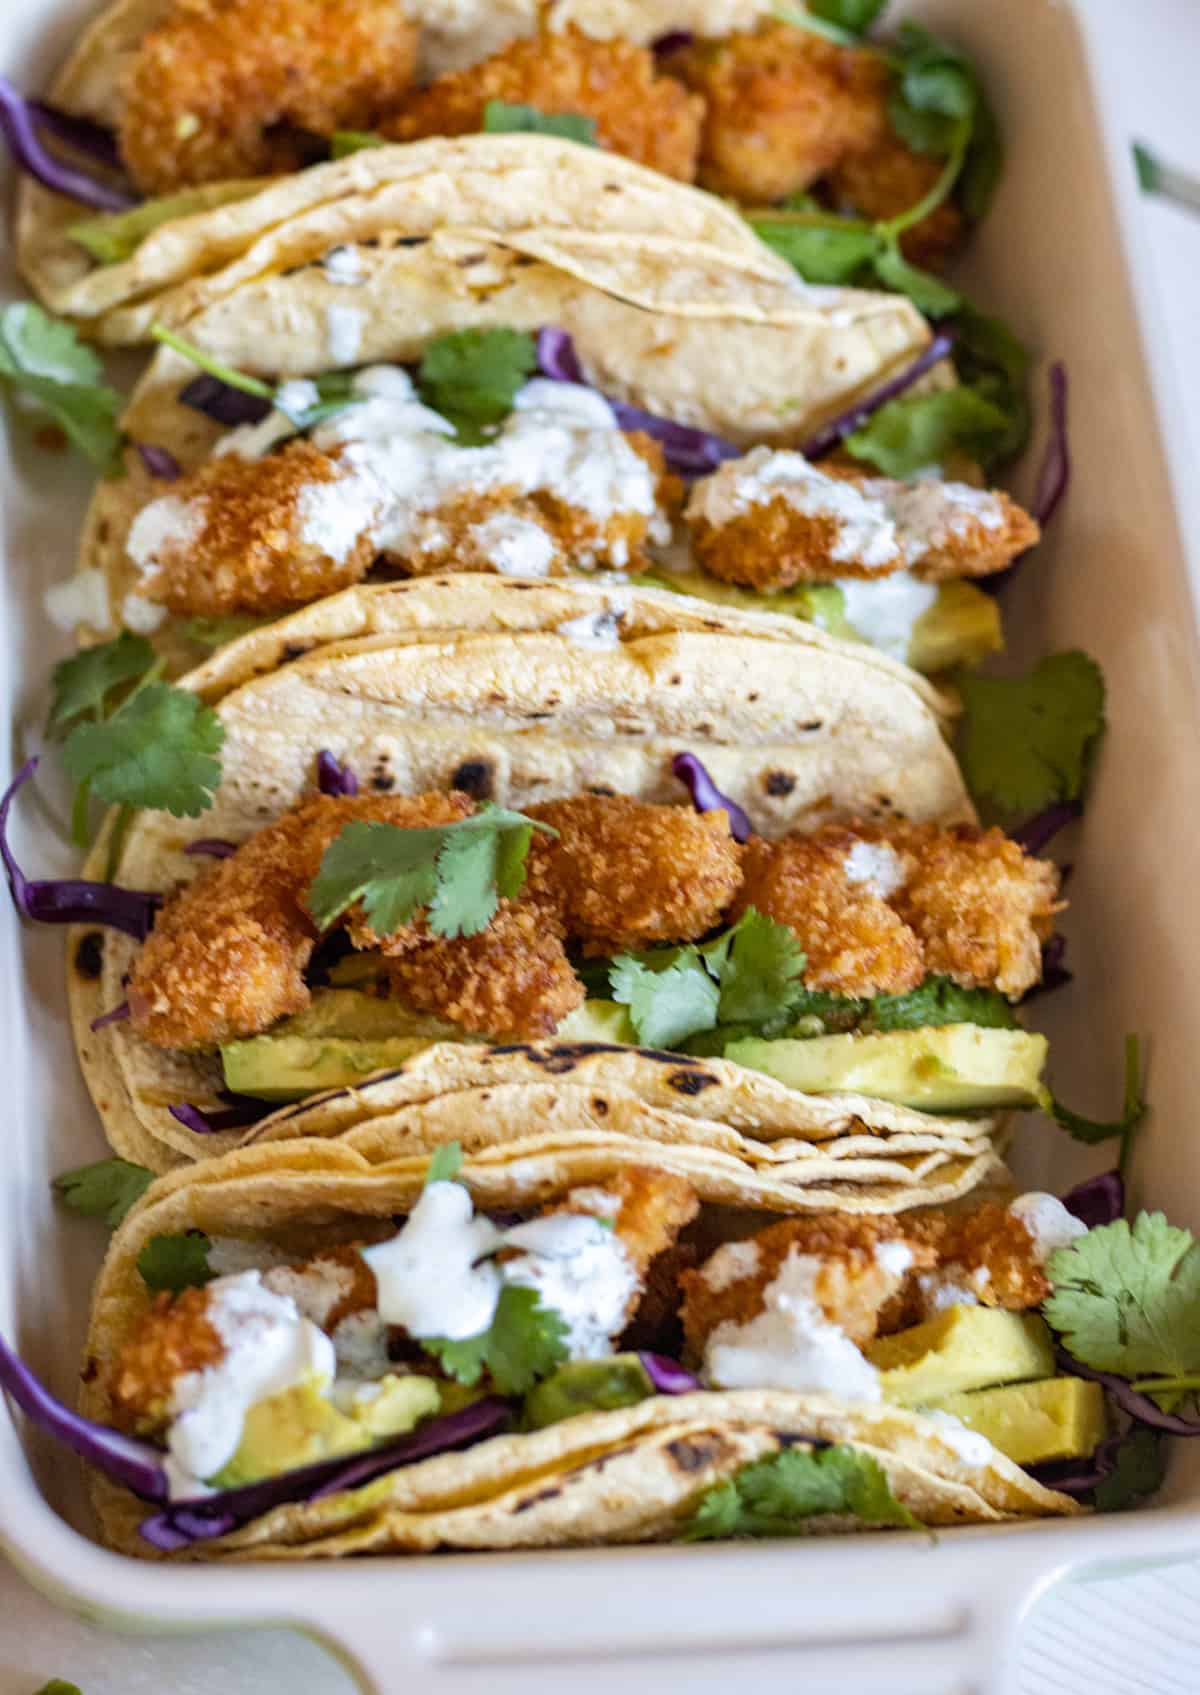 A row of fried shrimp tacos with avocado slices, purple cabbage, and crema.